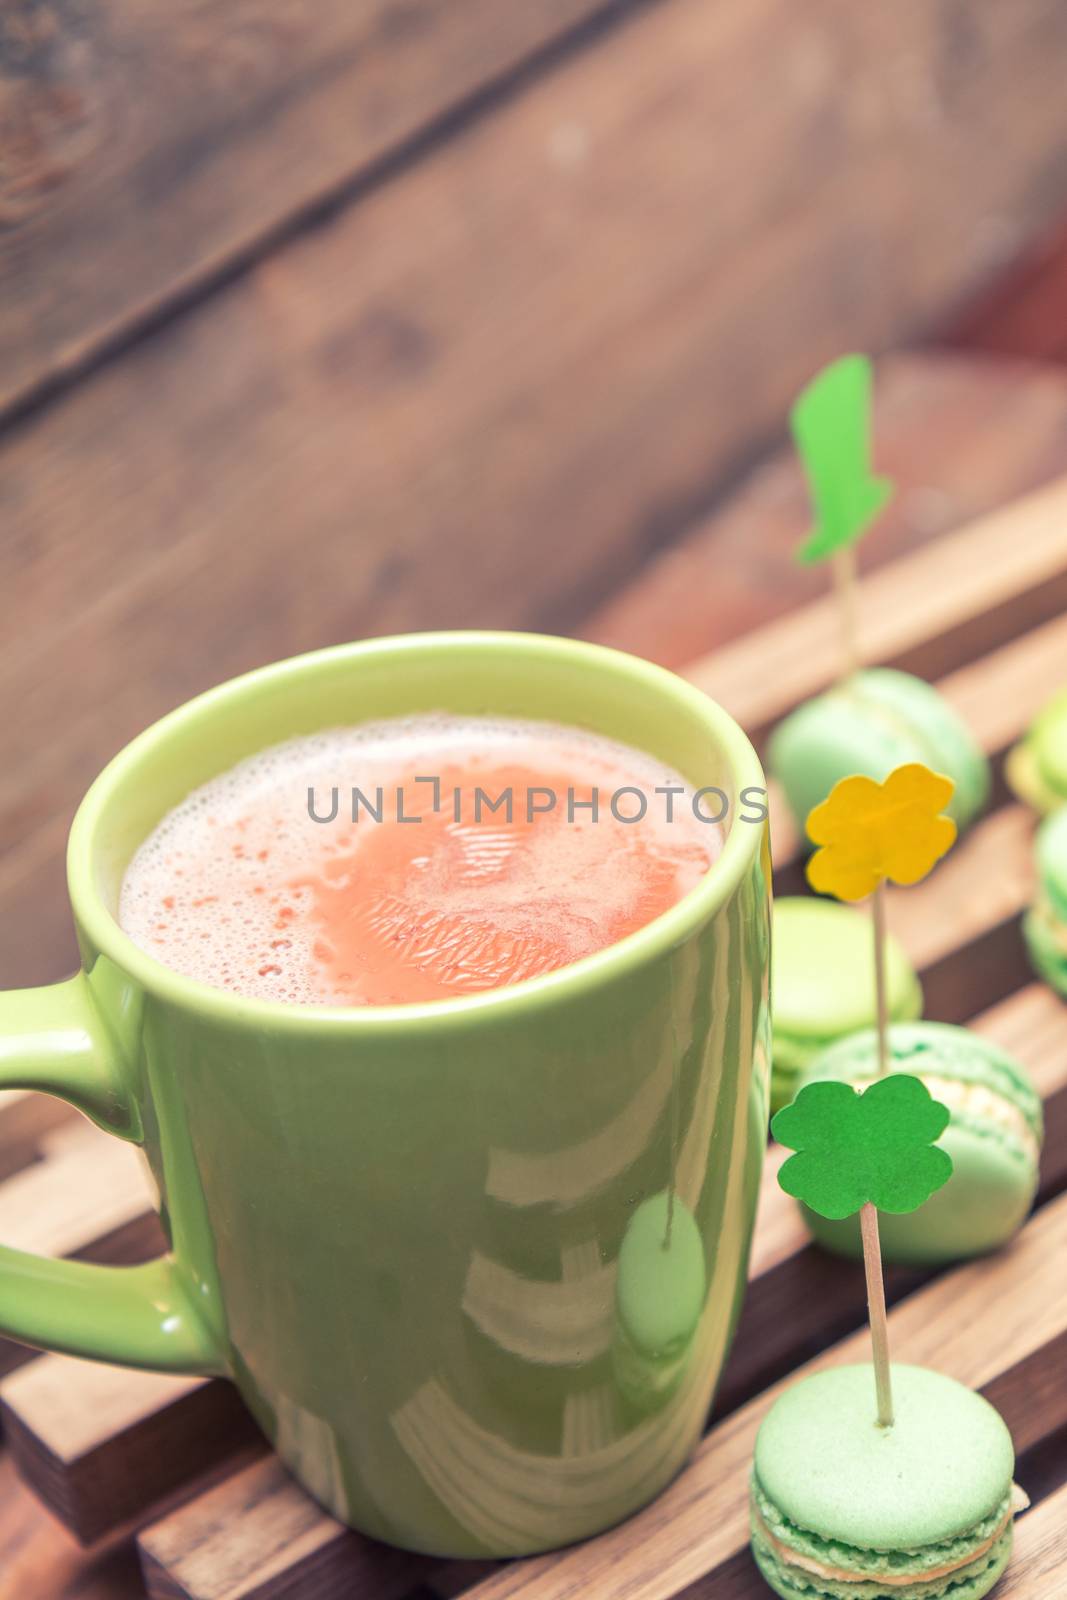 Hot cocoa in green cup and green macaroon cookies scattered on the wooden surface with St. Patrick’s Day attributes. Tonted photo. Shallow depth of field. Copy space